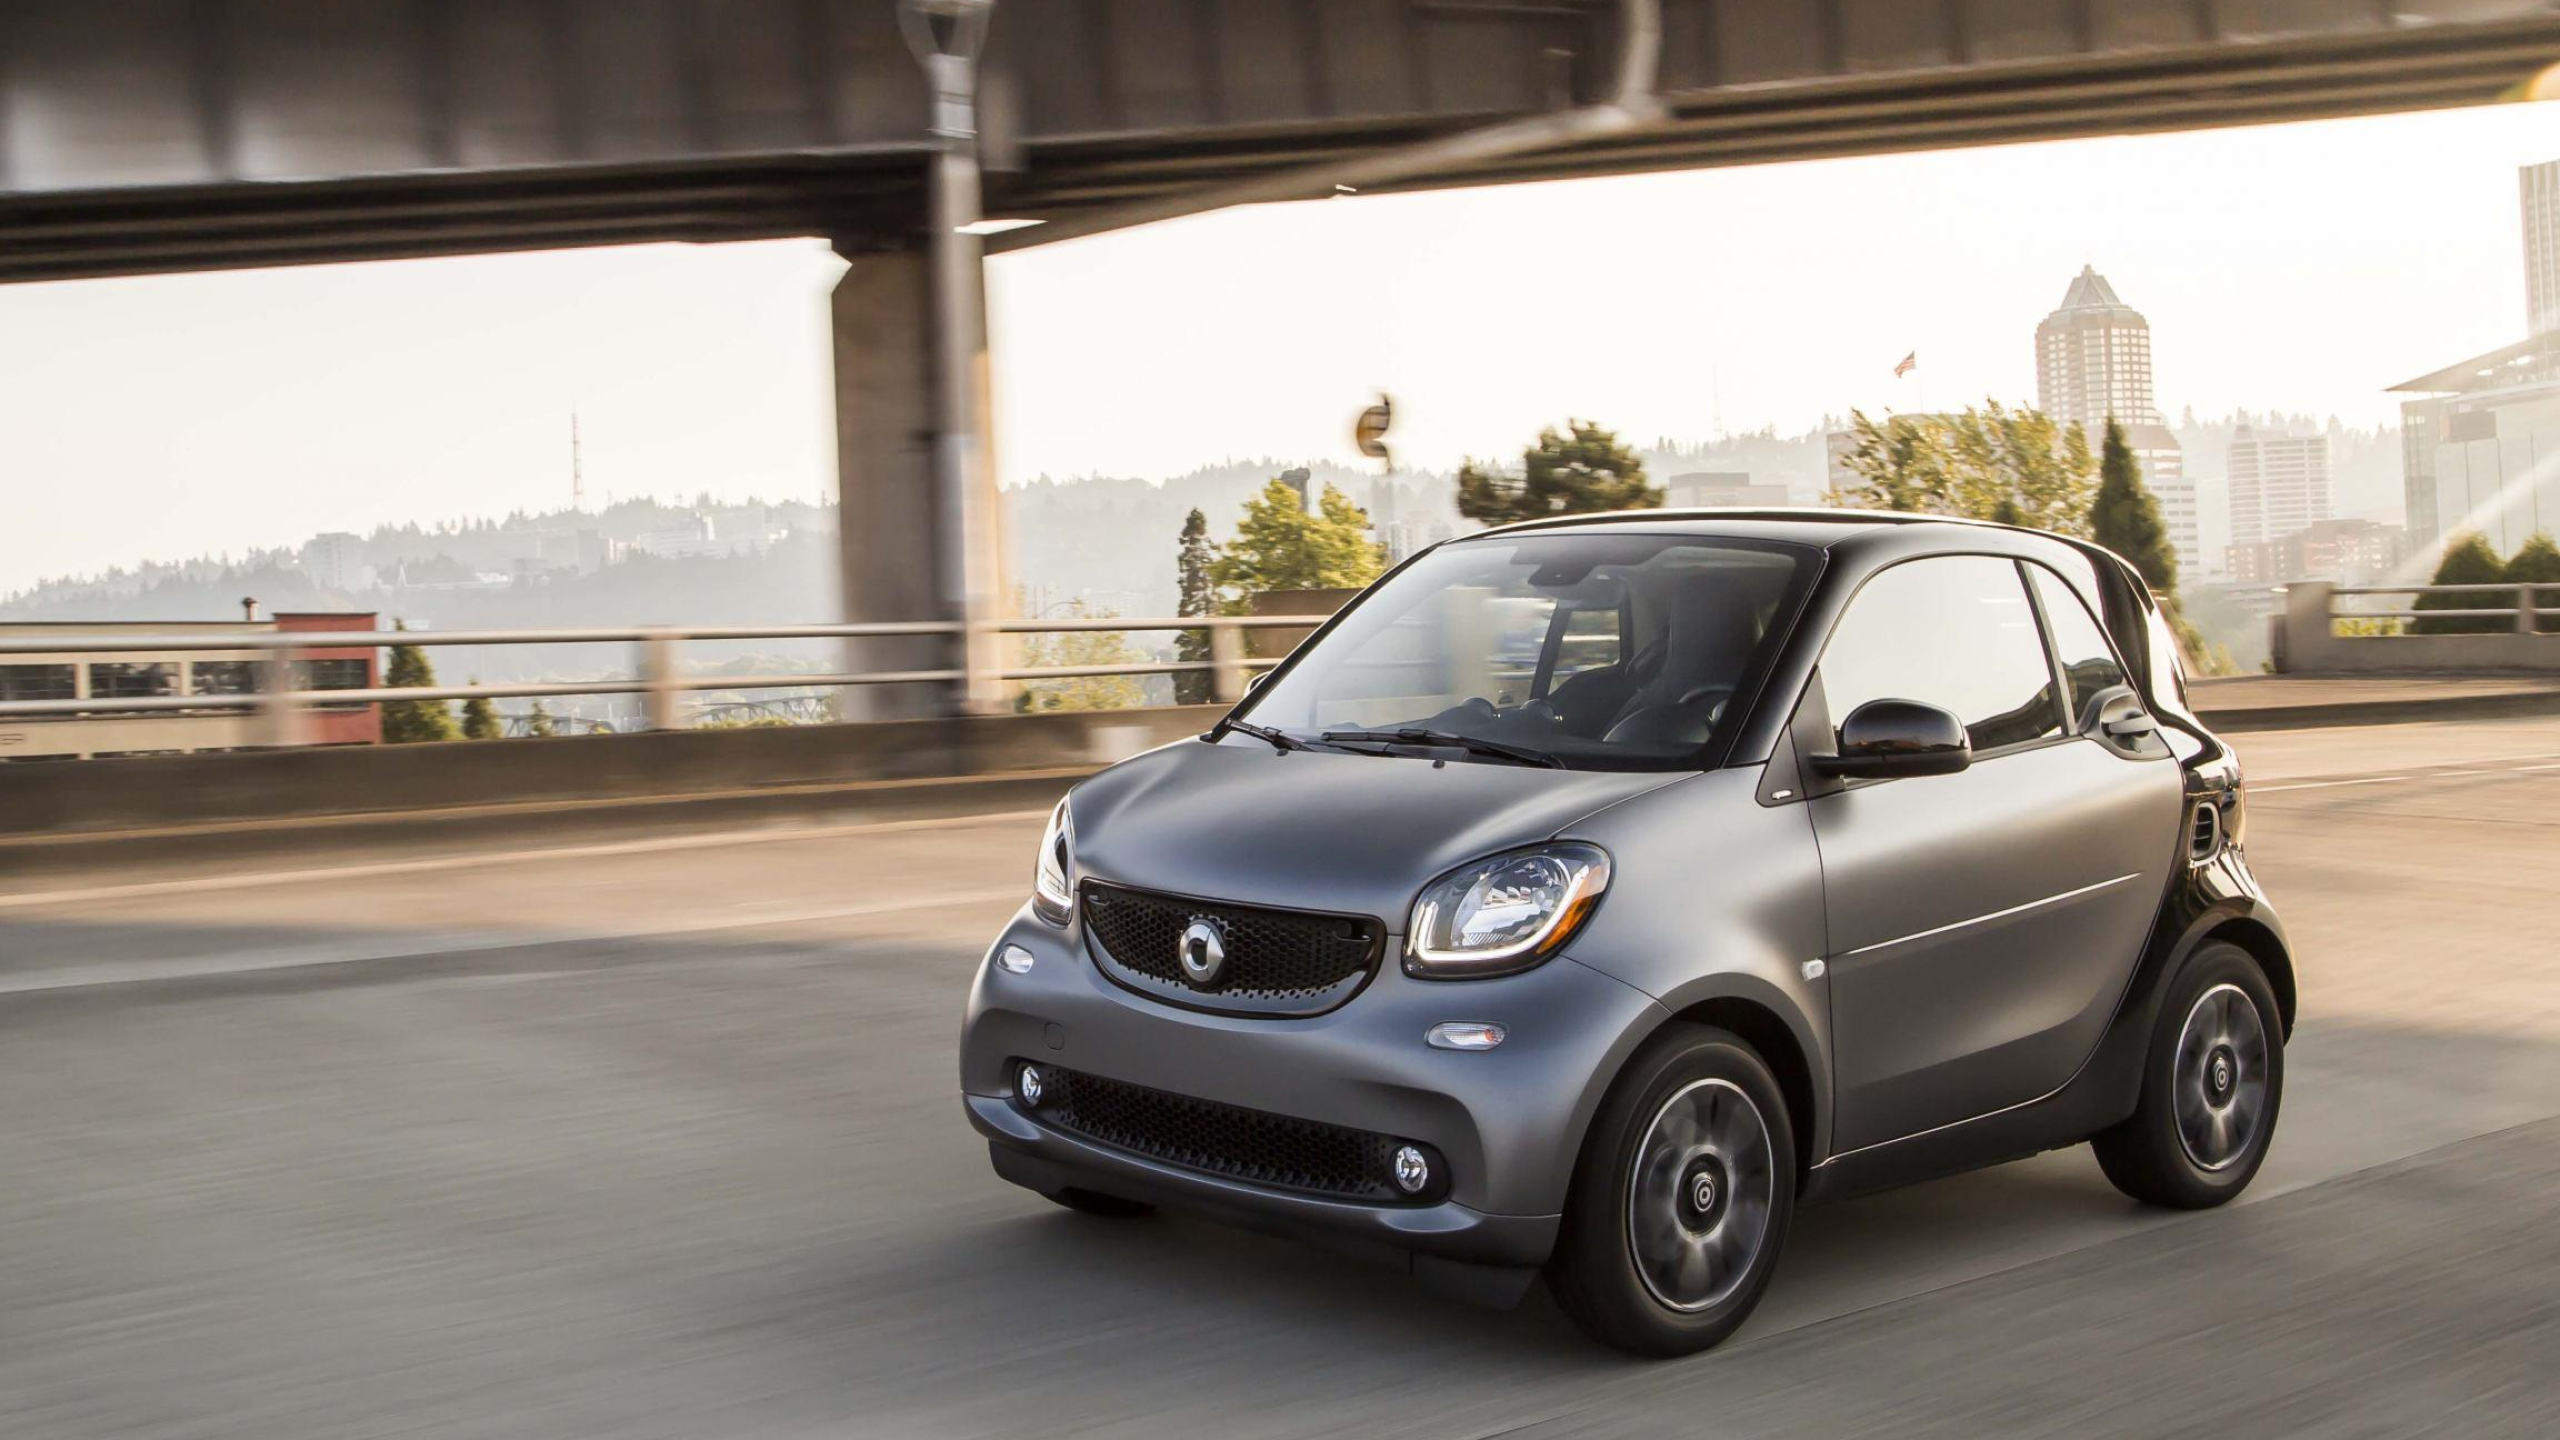 2560x1440 Smart Fortwo Wallpapers